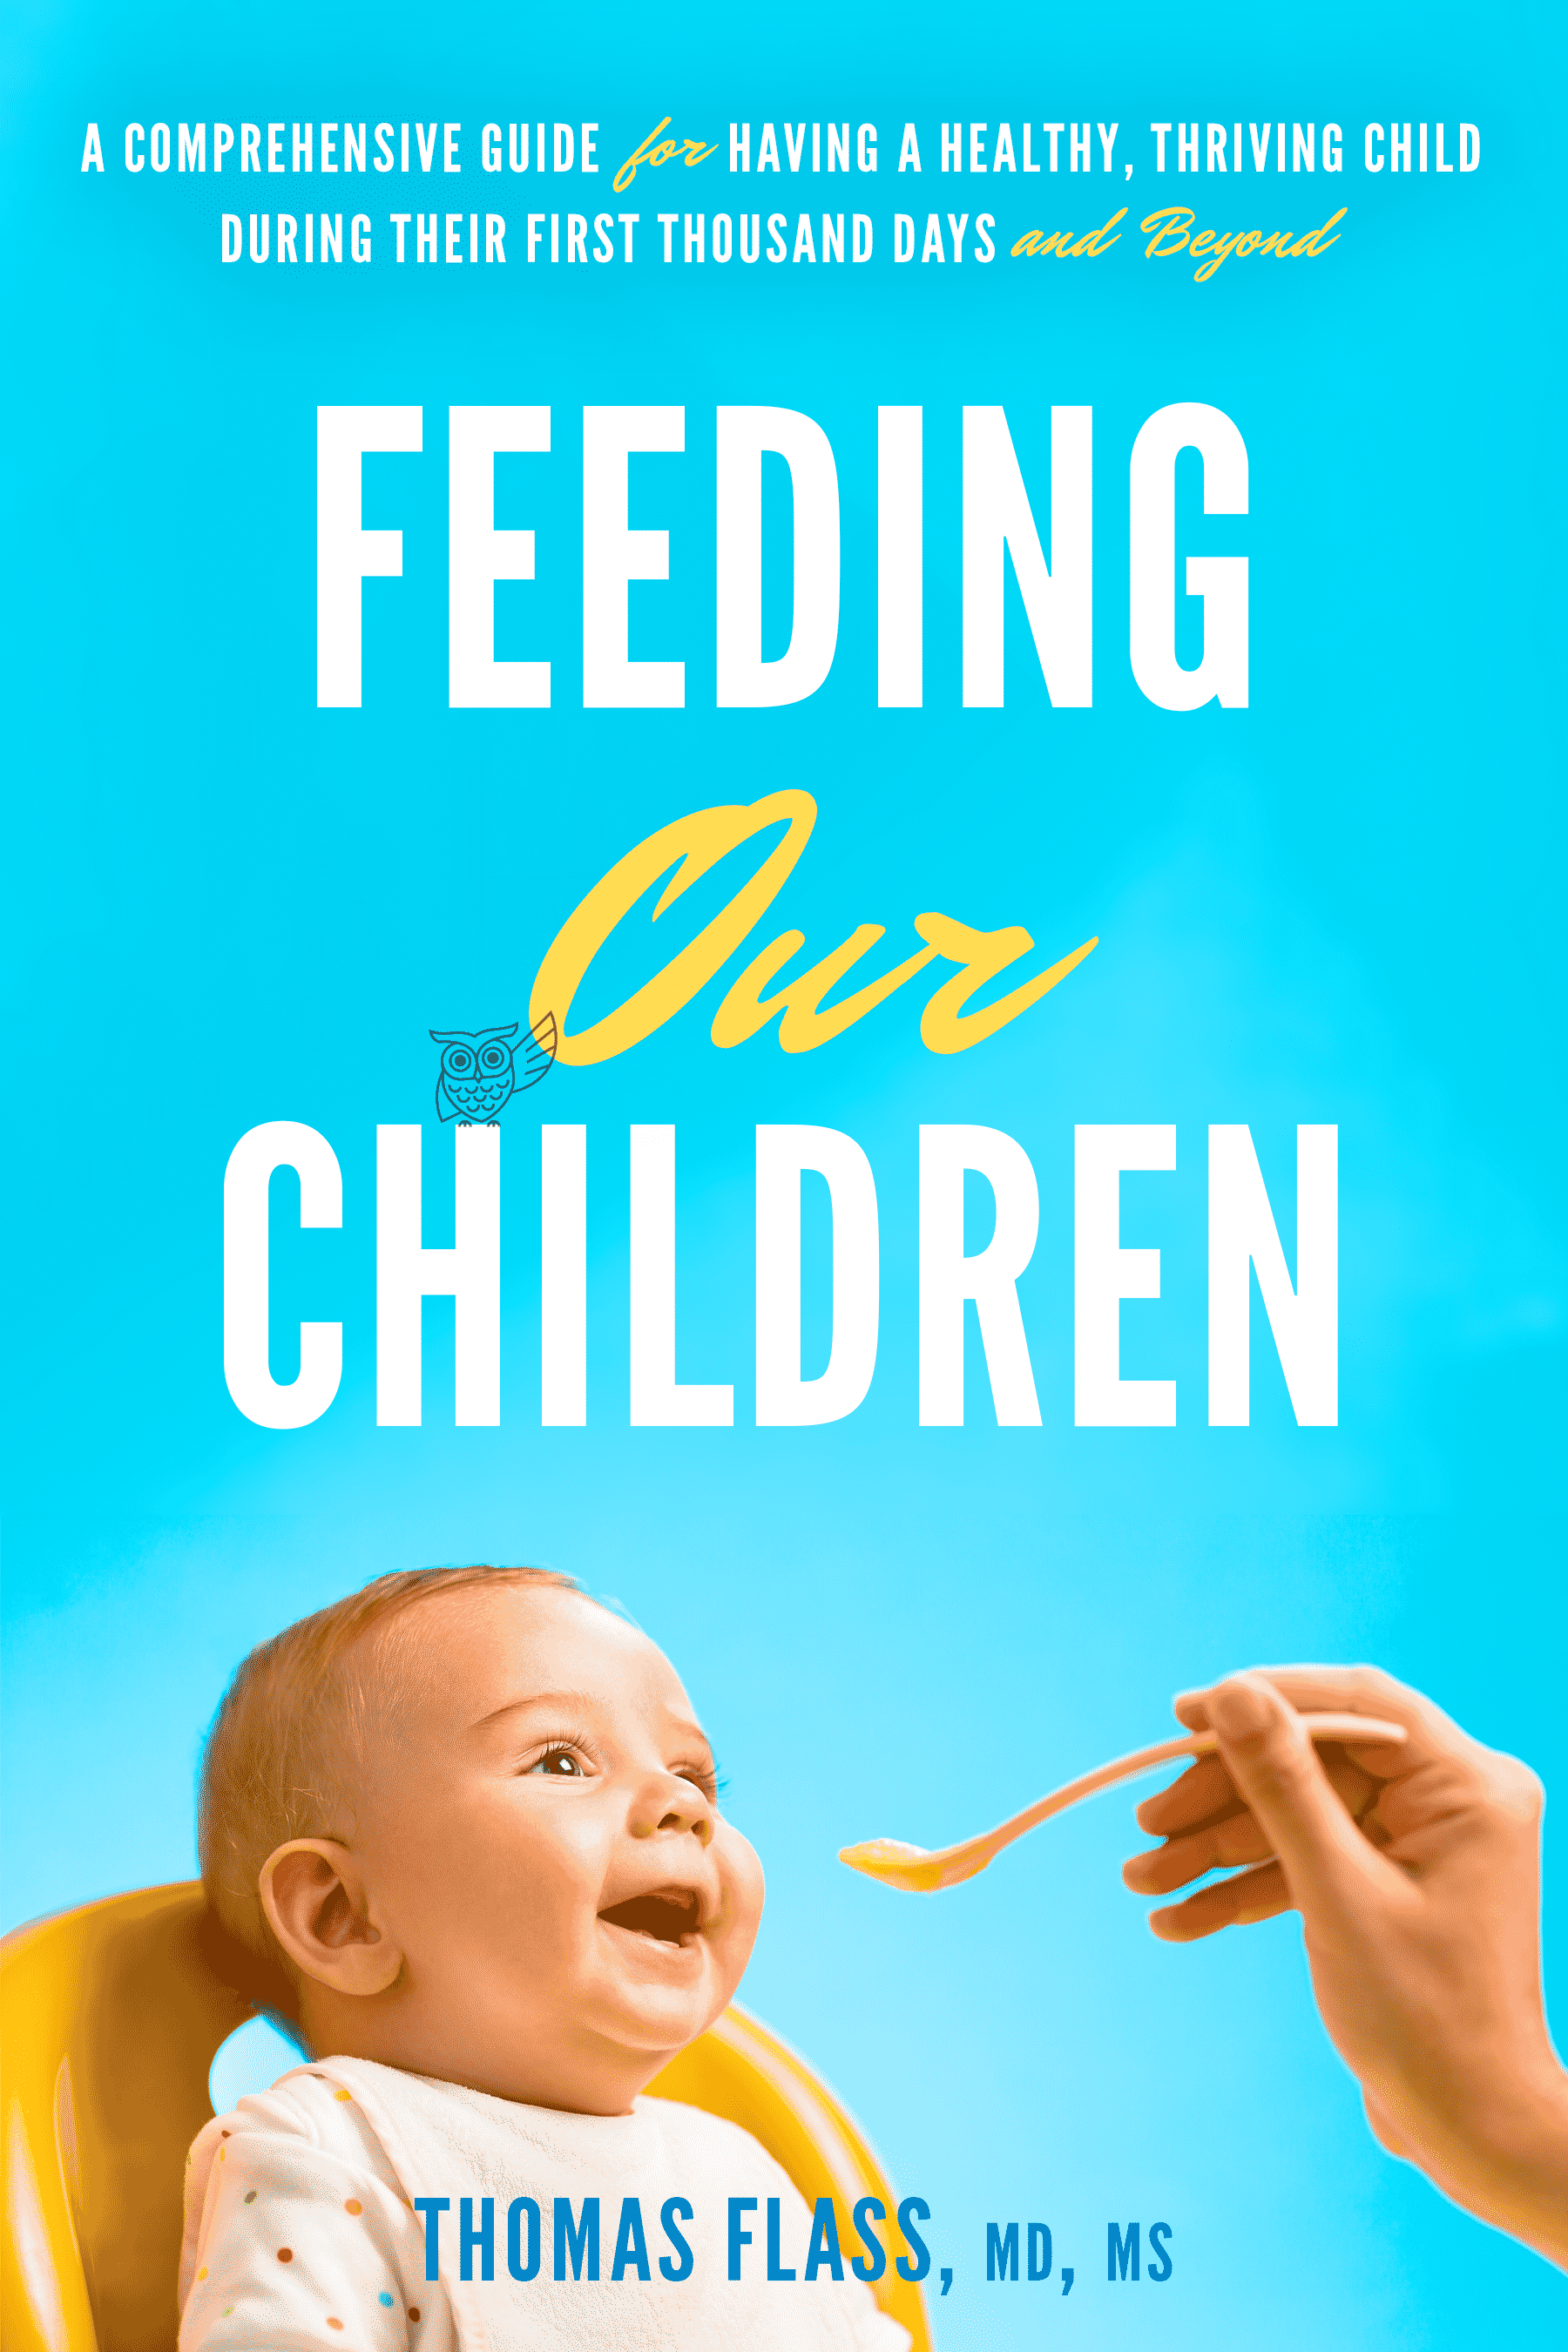 Feeding Our Children book cover image featuring a baby being fed with a hand and a yellow spoon. Book by by Tom Flass